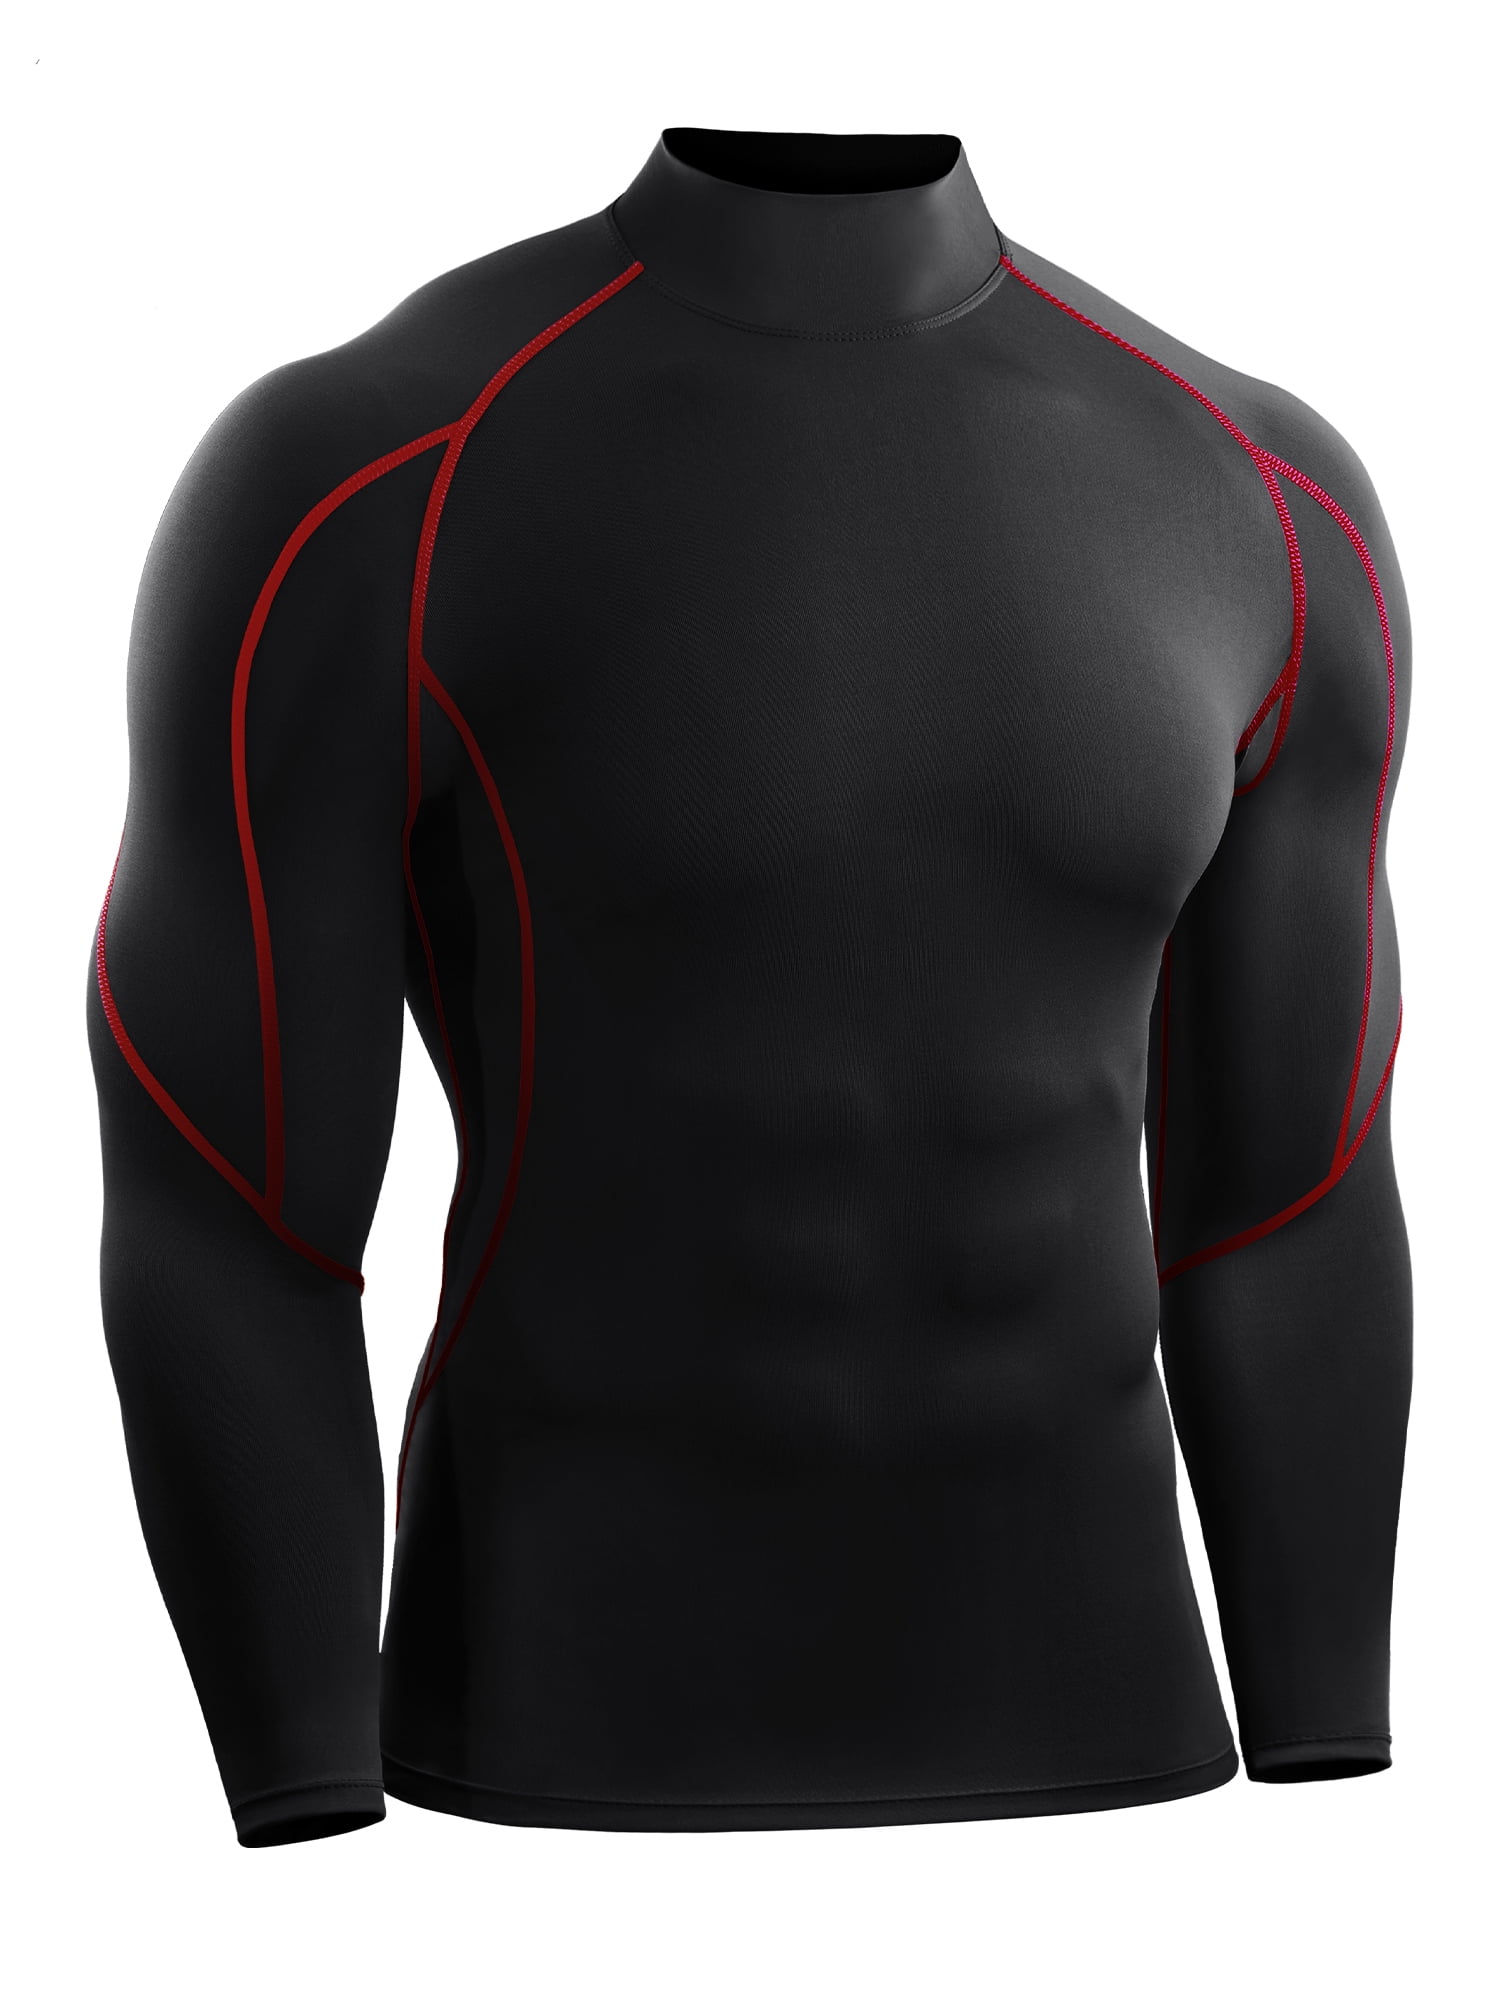 Mens Long Sleeve Base Layer Top Compression Armour Top Thermal Gym Sports Shirt 